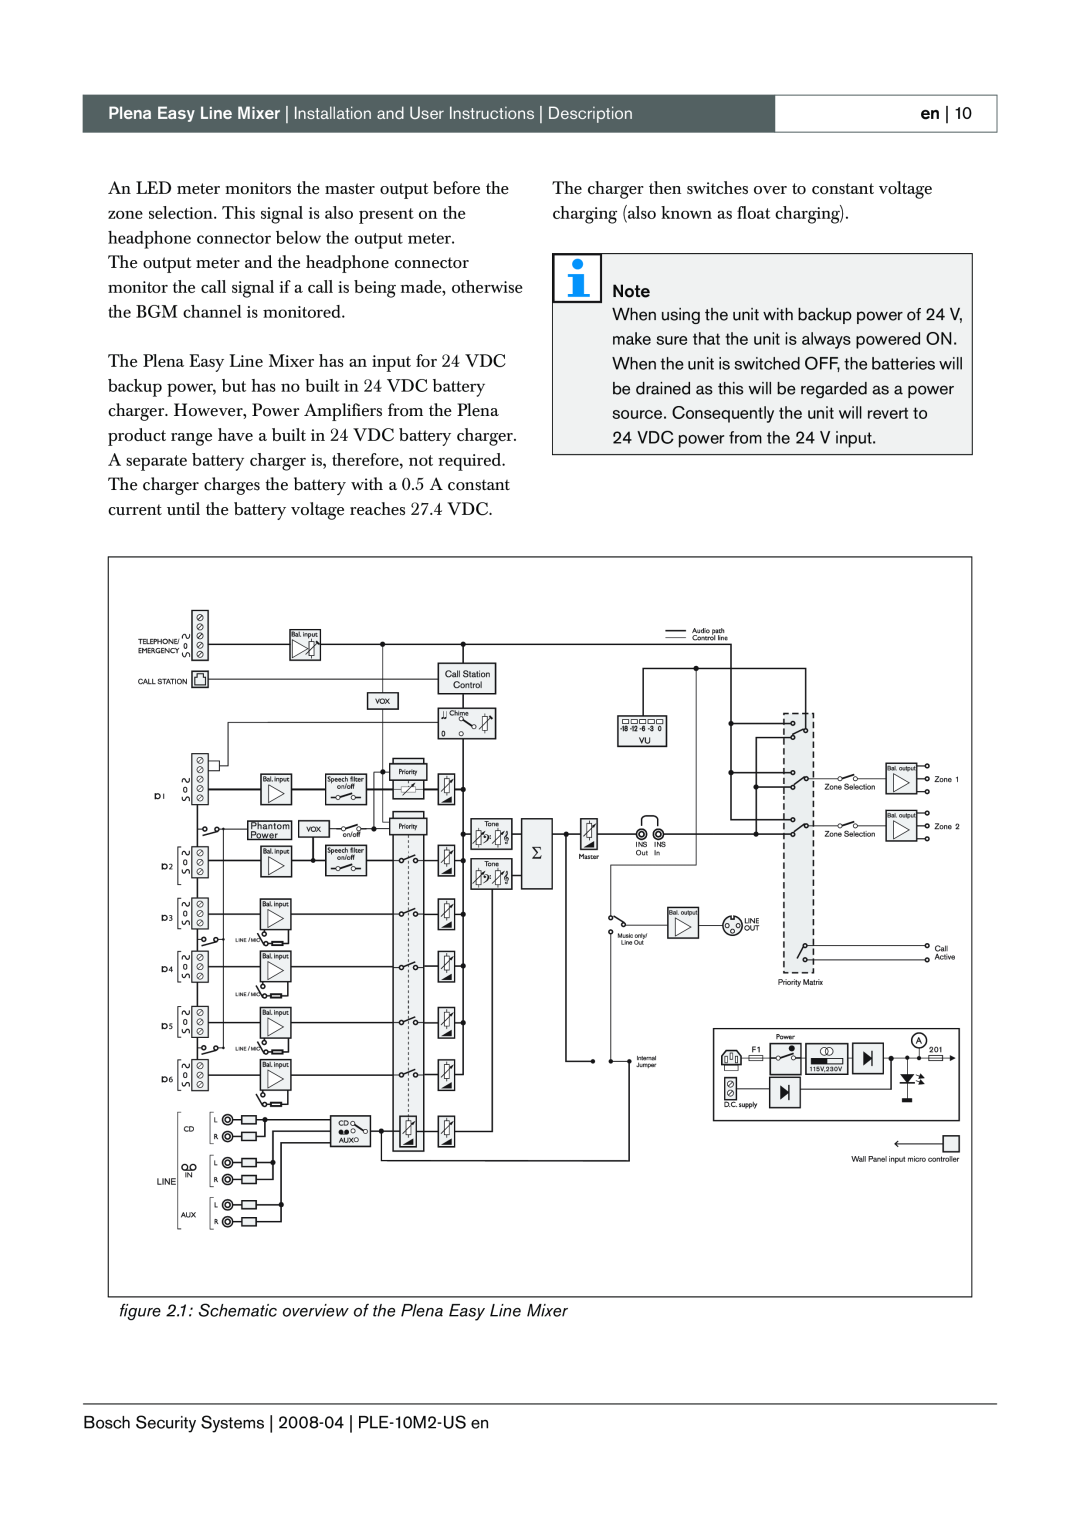 Bosch Appliances manual VDC power from the 24 V input, Bosch Security Systems 2008-04 PLE-10M2-USen 